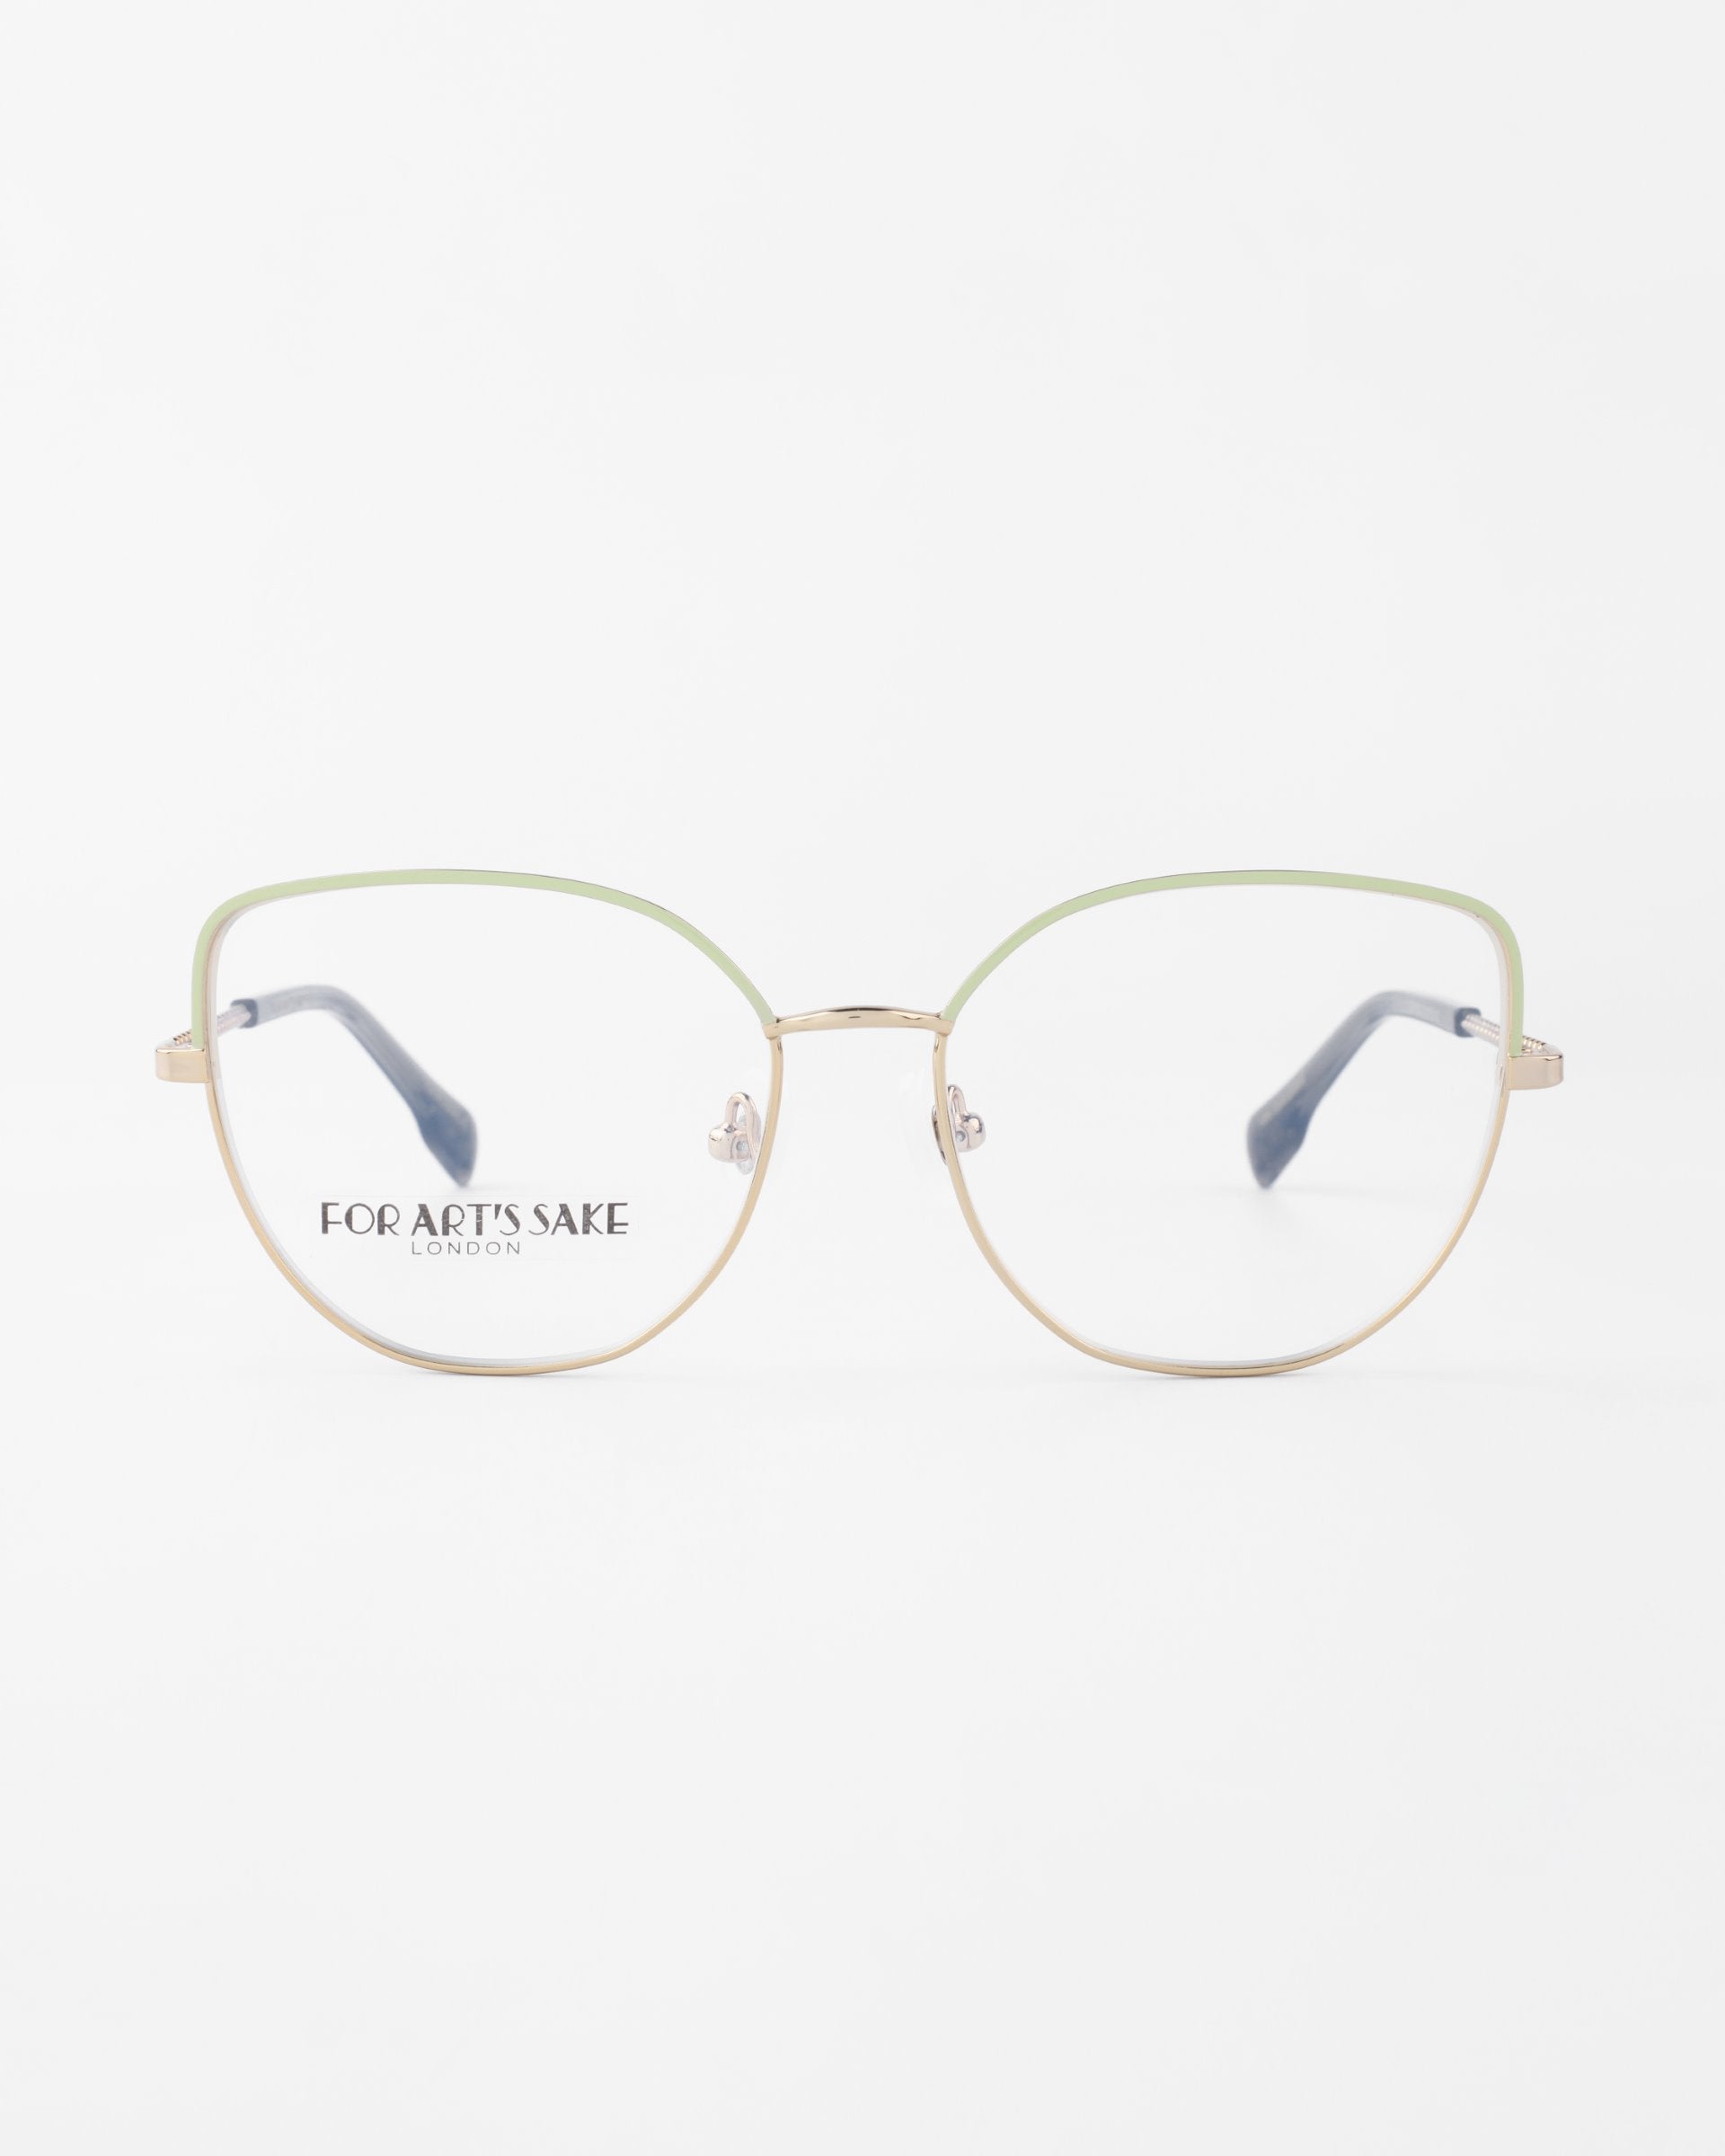 A pair of **Ophelia** eyeglasses with thin, gold metal frames and green accents around the lenses. Featuring a subtle cat-eye silhouette, the clear lenses carry the brand "**For Art's Sake®**" on the inside of the left lens. The glasses are set against a plain white background.